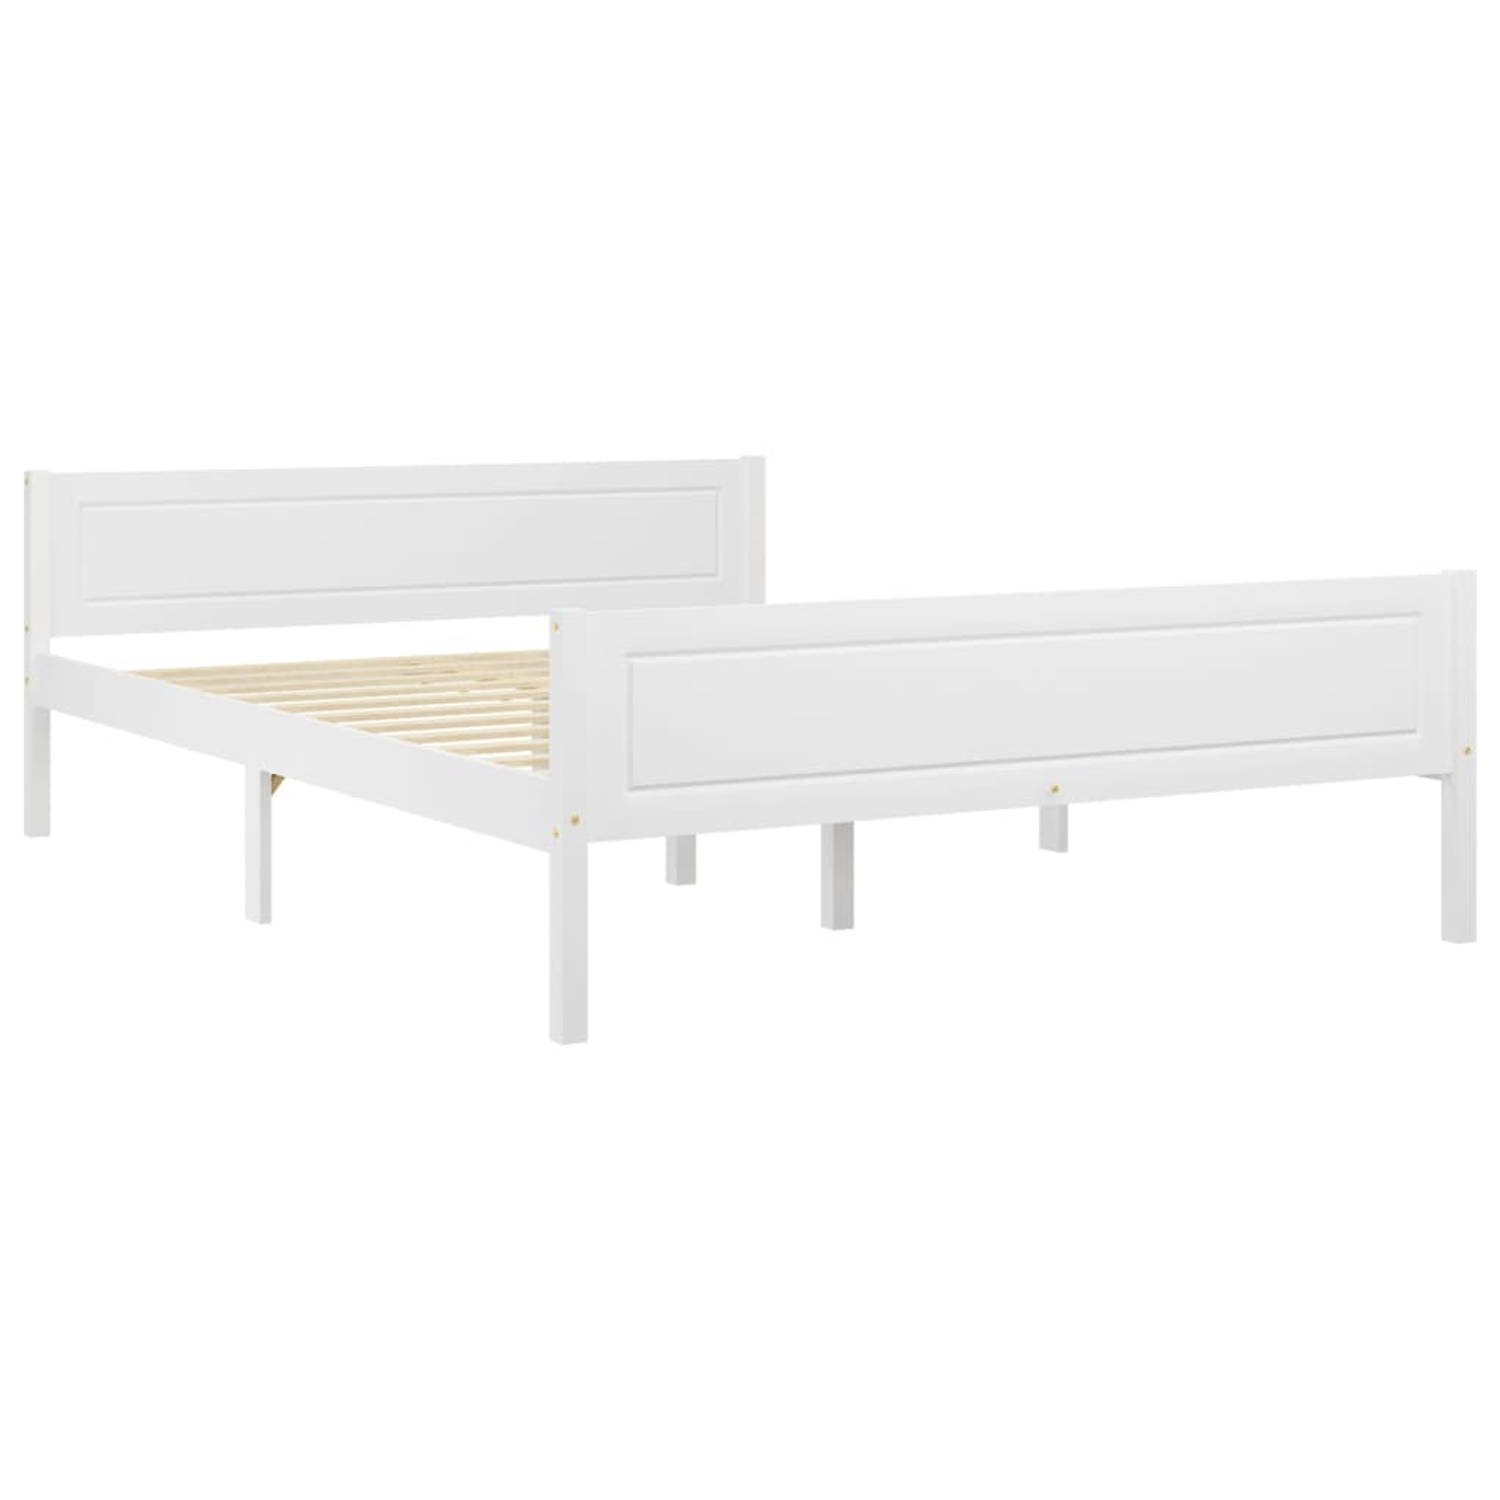 The Living Store Bedframe massief grenenhout wit 160x200 cm - Bedframe - Bedframe - Bed Frame - Bed Frames - Bed - Bedden - 2-persoonsbed - 2-persoonsbedden - Tweepersoons Bed